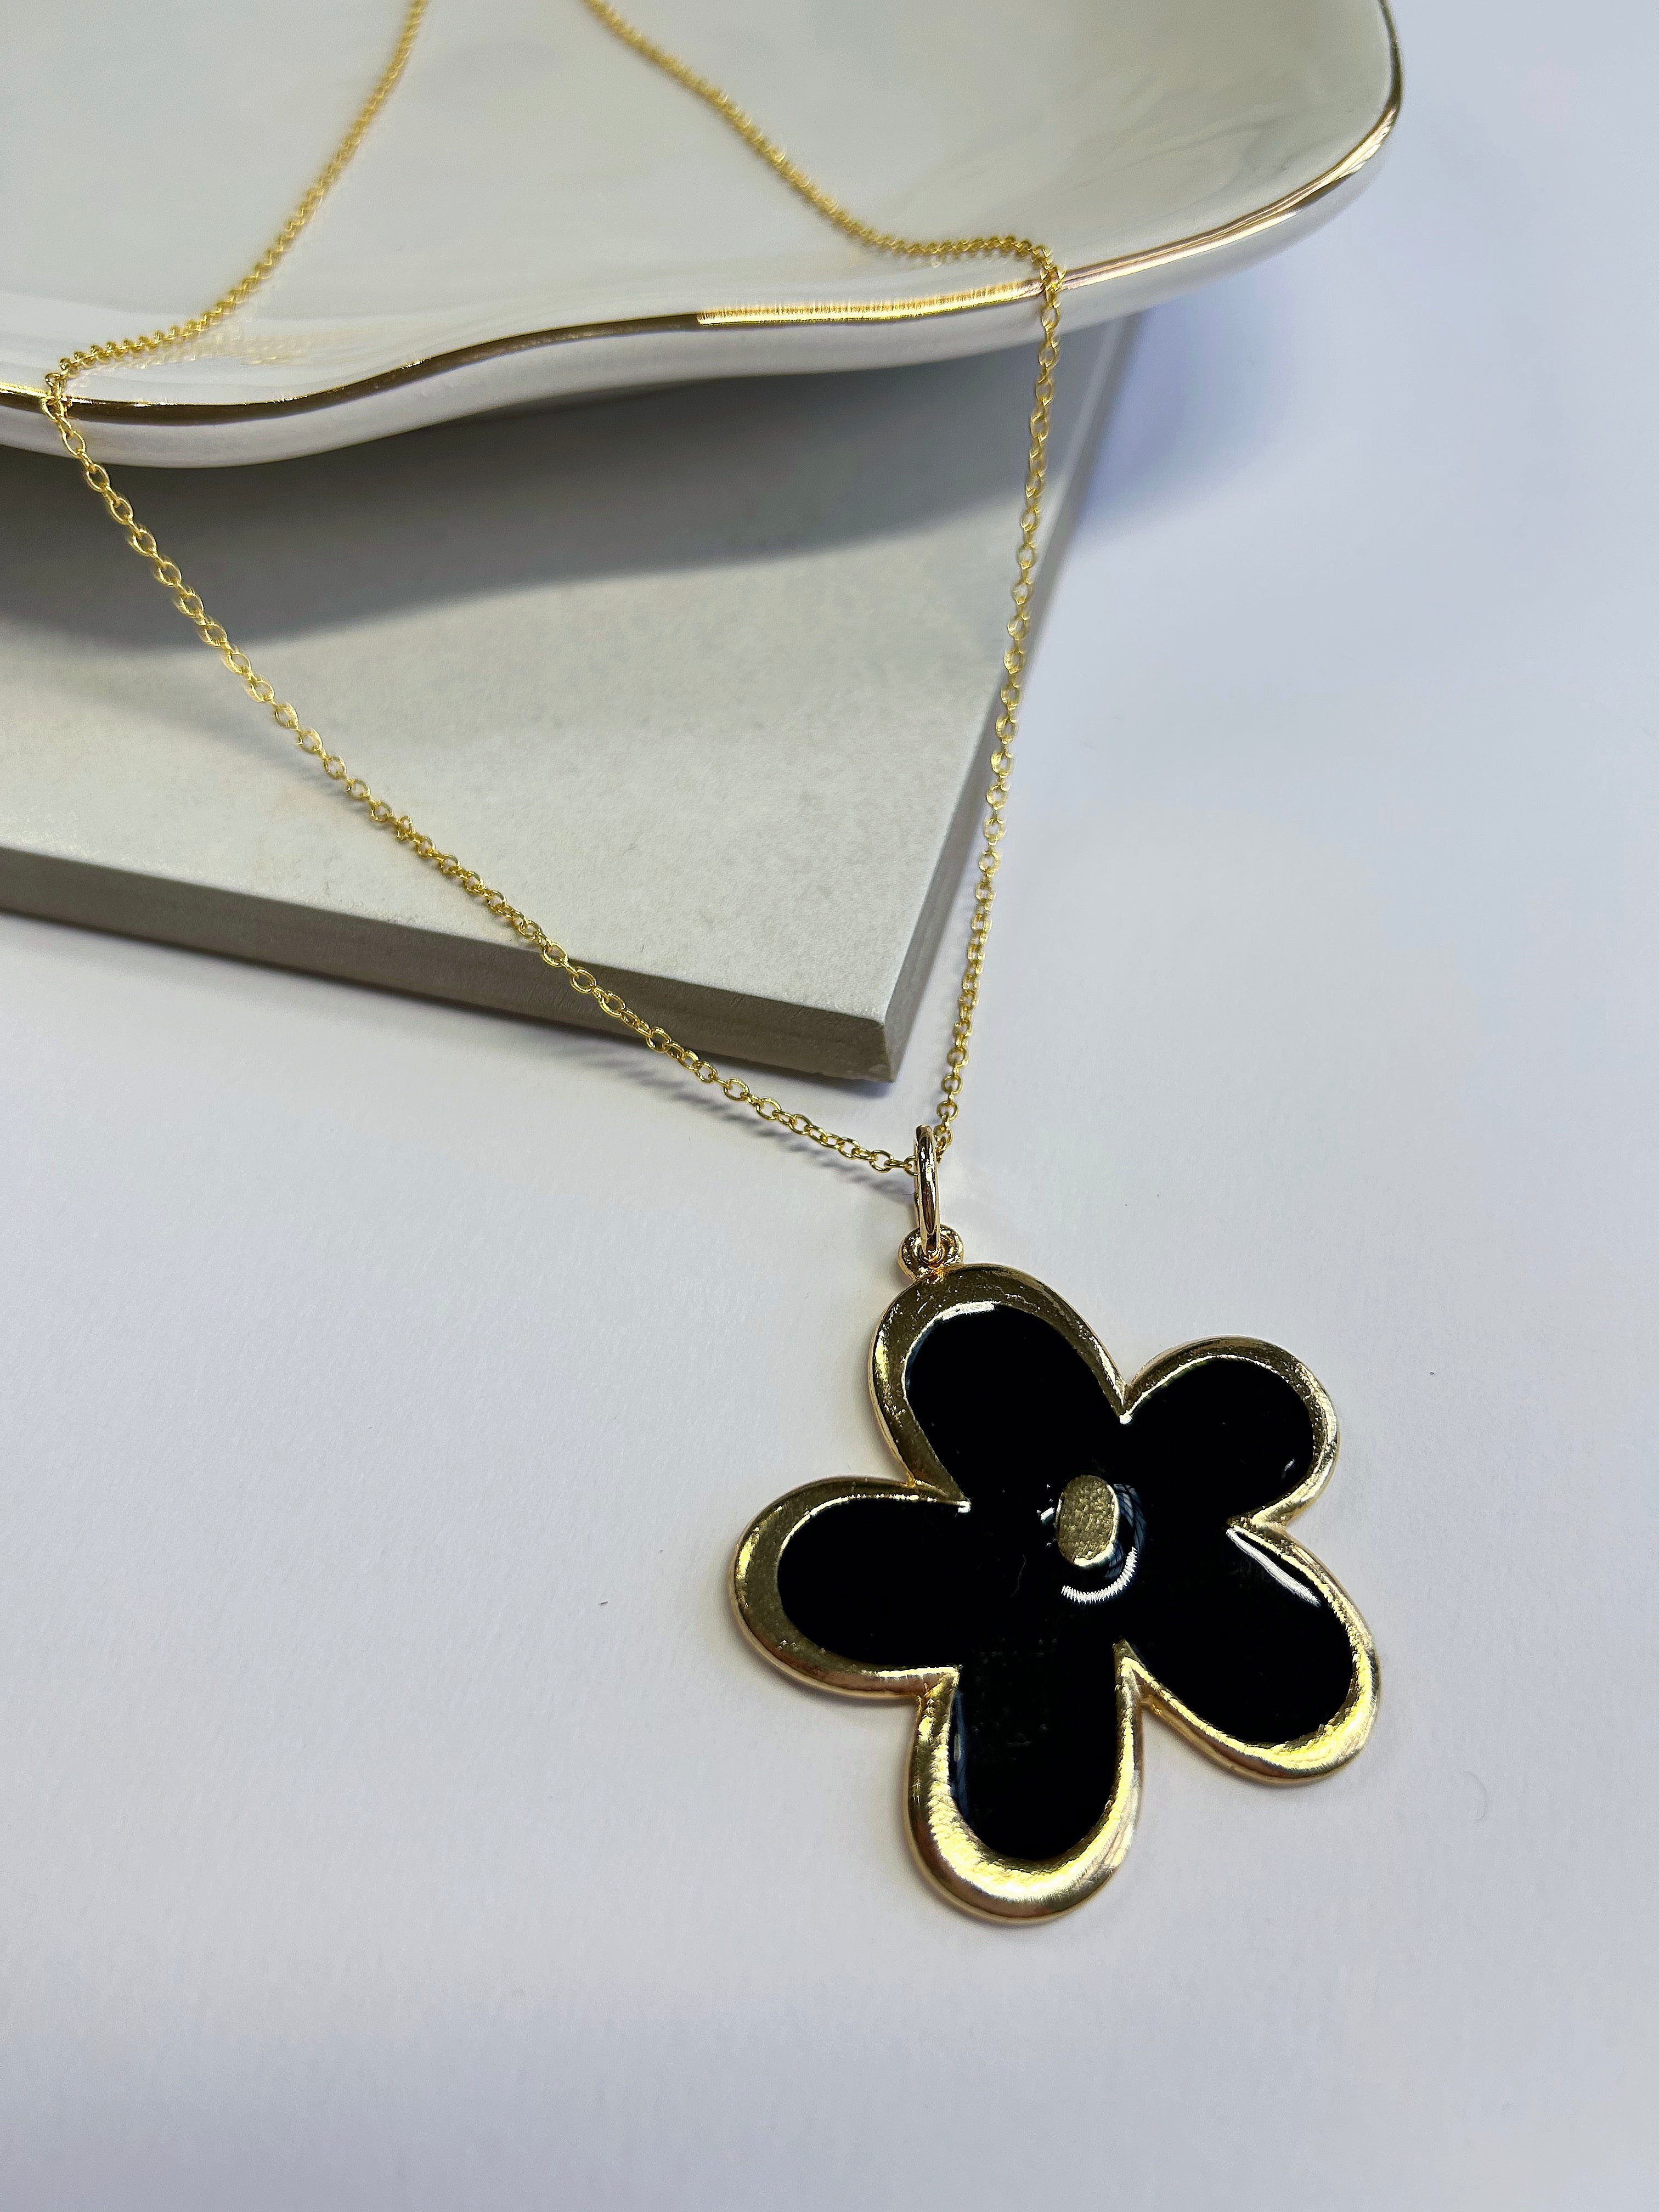 Gold Plated Flower Pendant Necklace - 18"